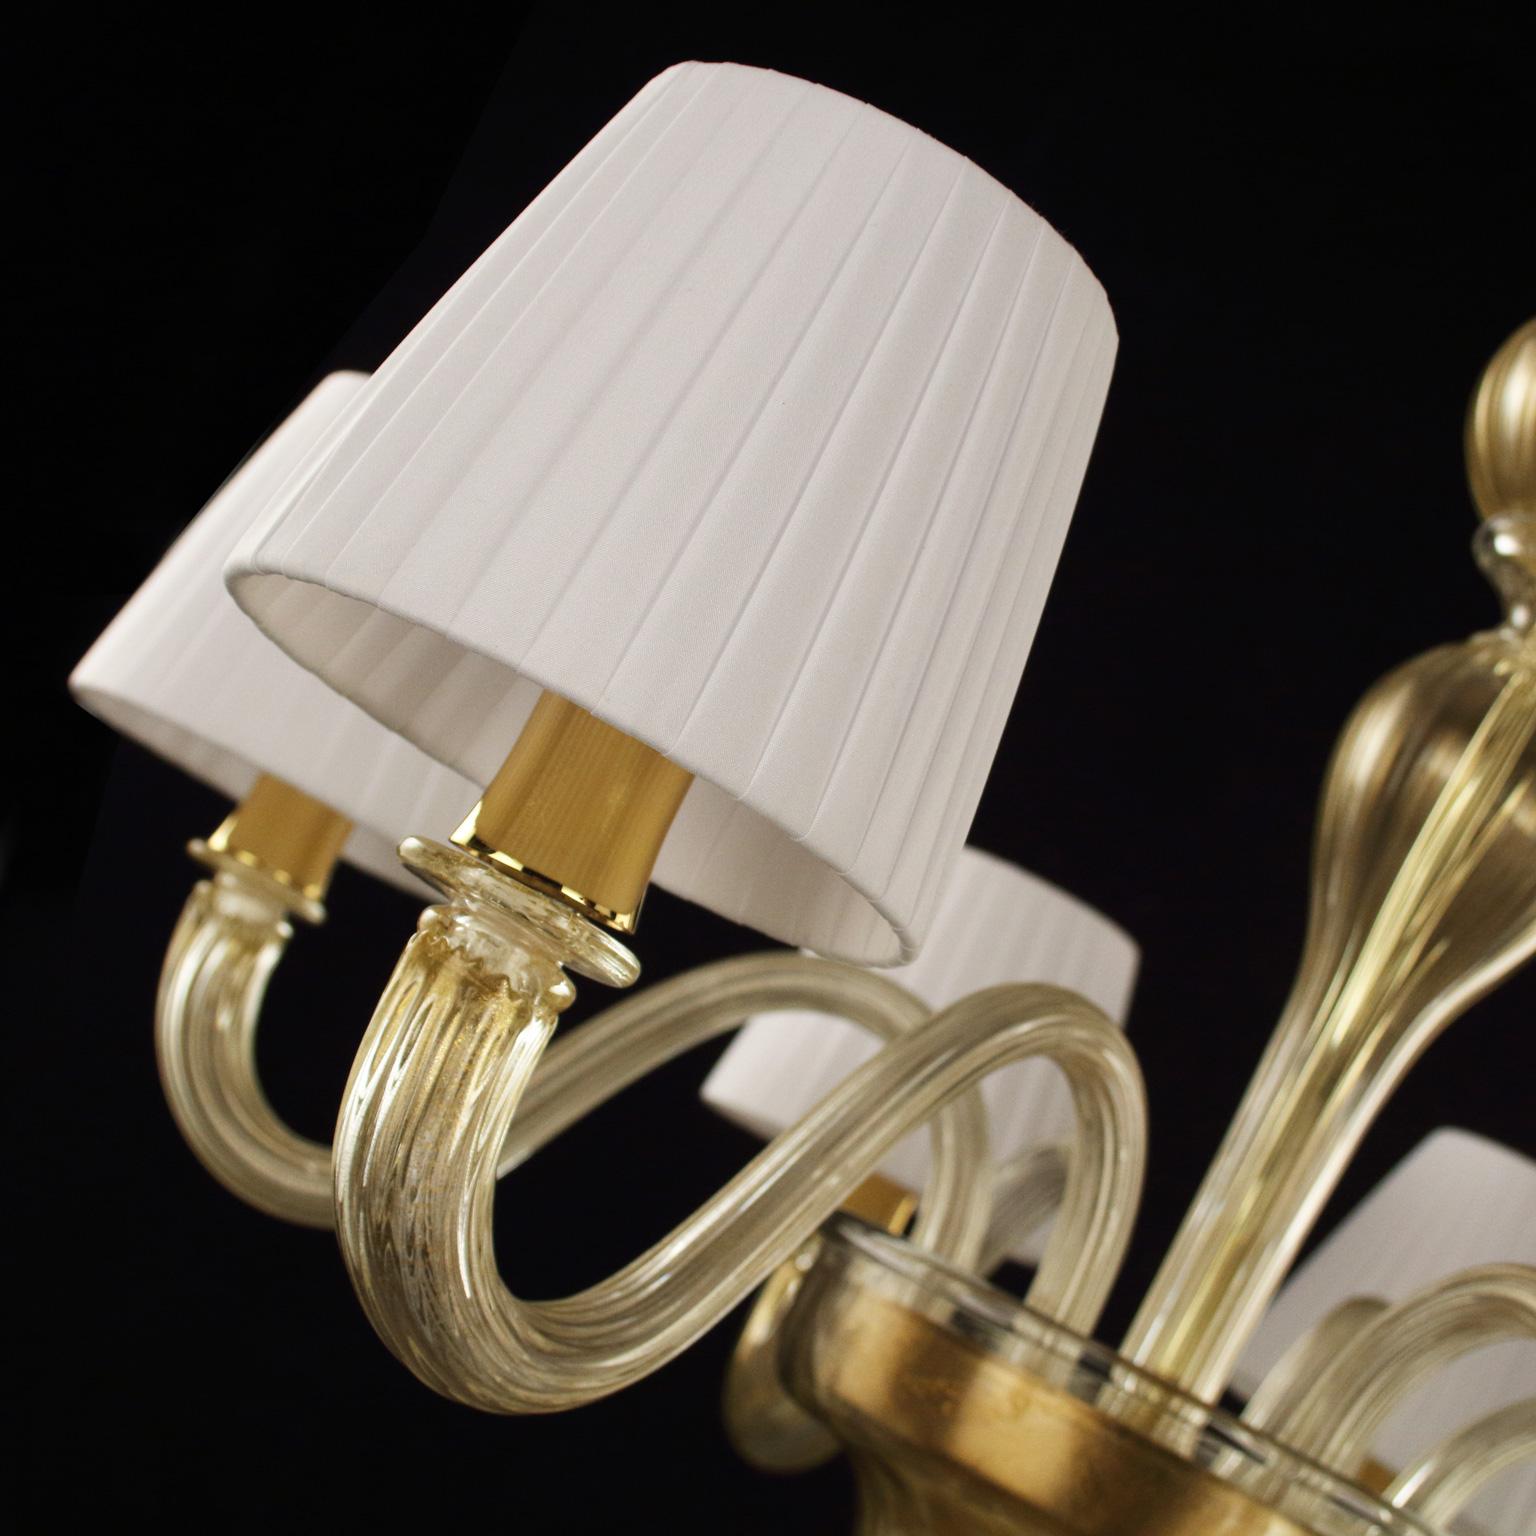 Chandelier 6 Arms Gold Murano Glass, White Lampshades Chapeau by Multiforme In New Condition For Sale In Trebaseleghe, IT